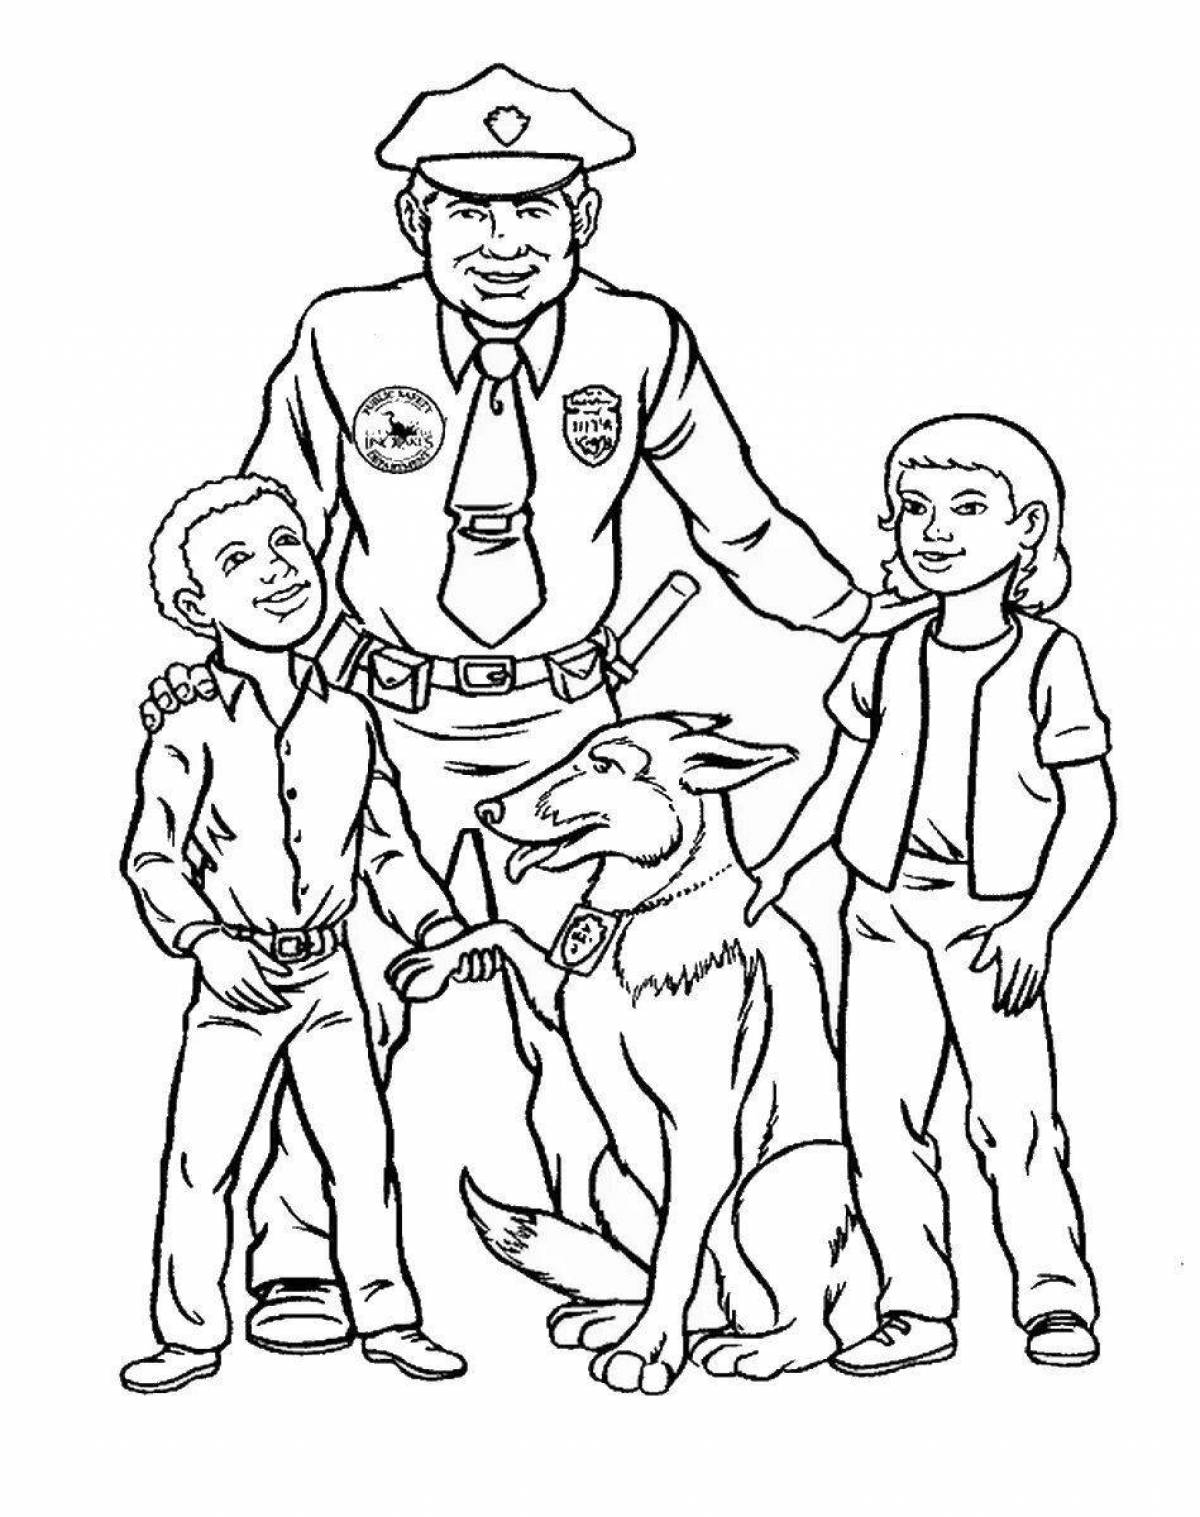 Coloring page graceful policeman